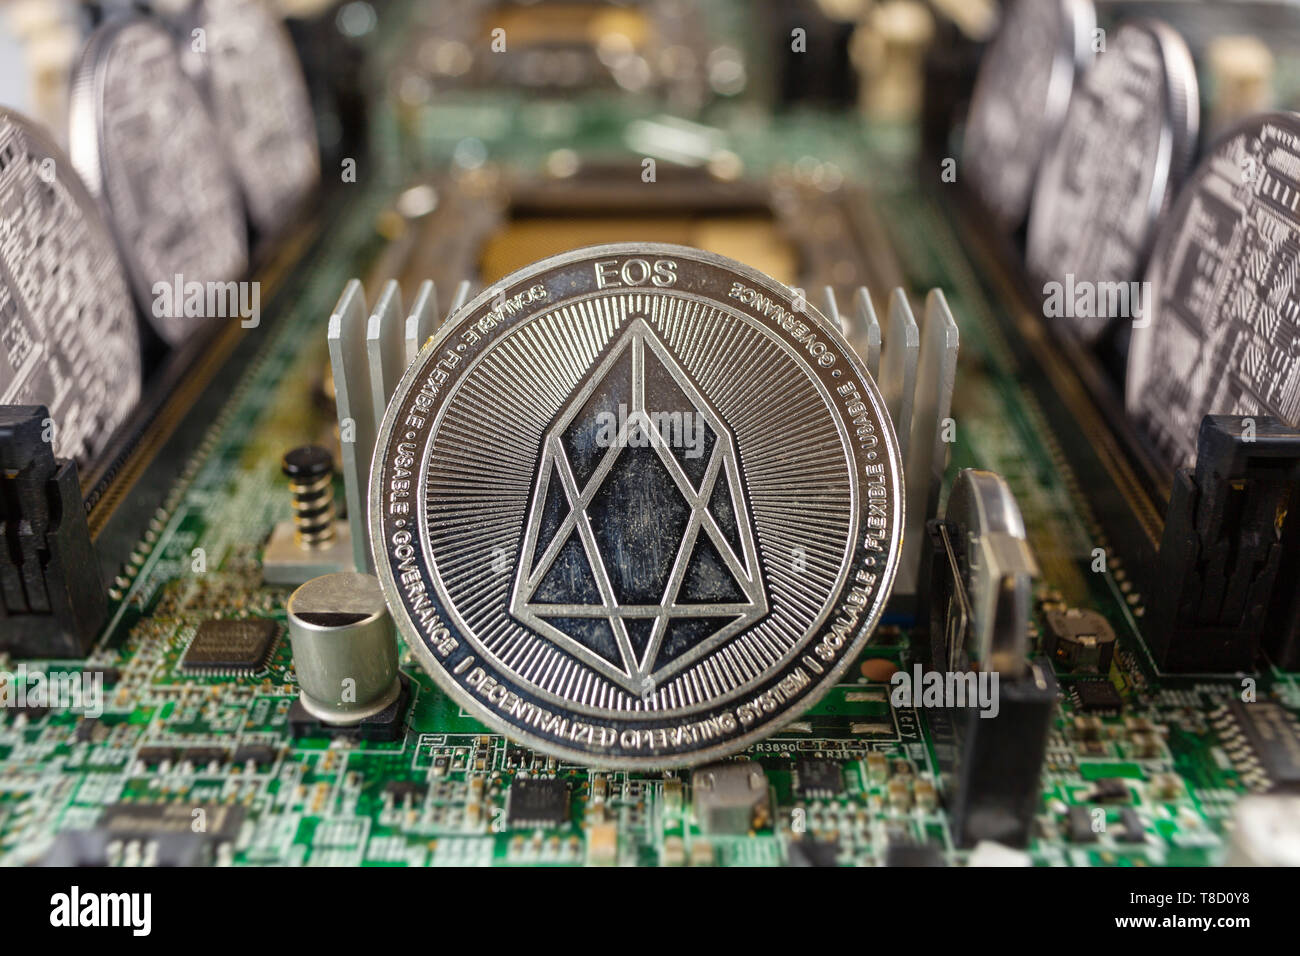 EOS coinclose-up on a computer circuit motherboard as a blockchain technology payment network. Digital cryptocurrency concept and mining. Stock Photo